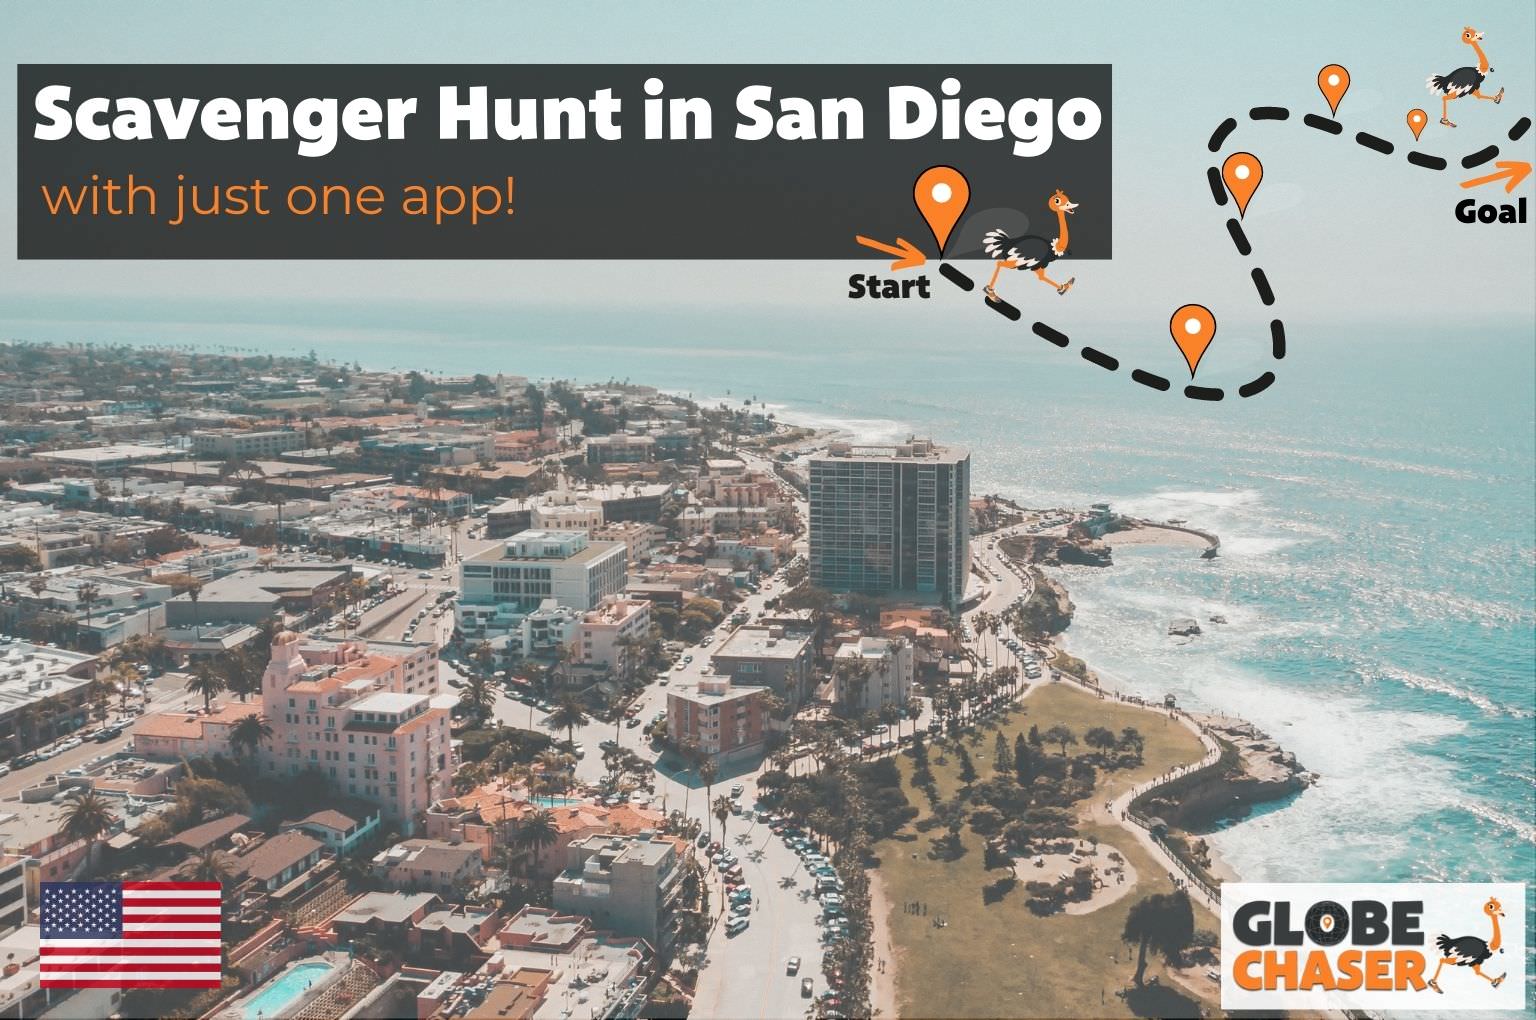 Scavenger Hunt in San Diego, USA - Family Activities with the Globe Chaser App for Outdoor Fun